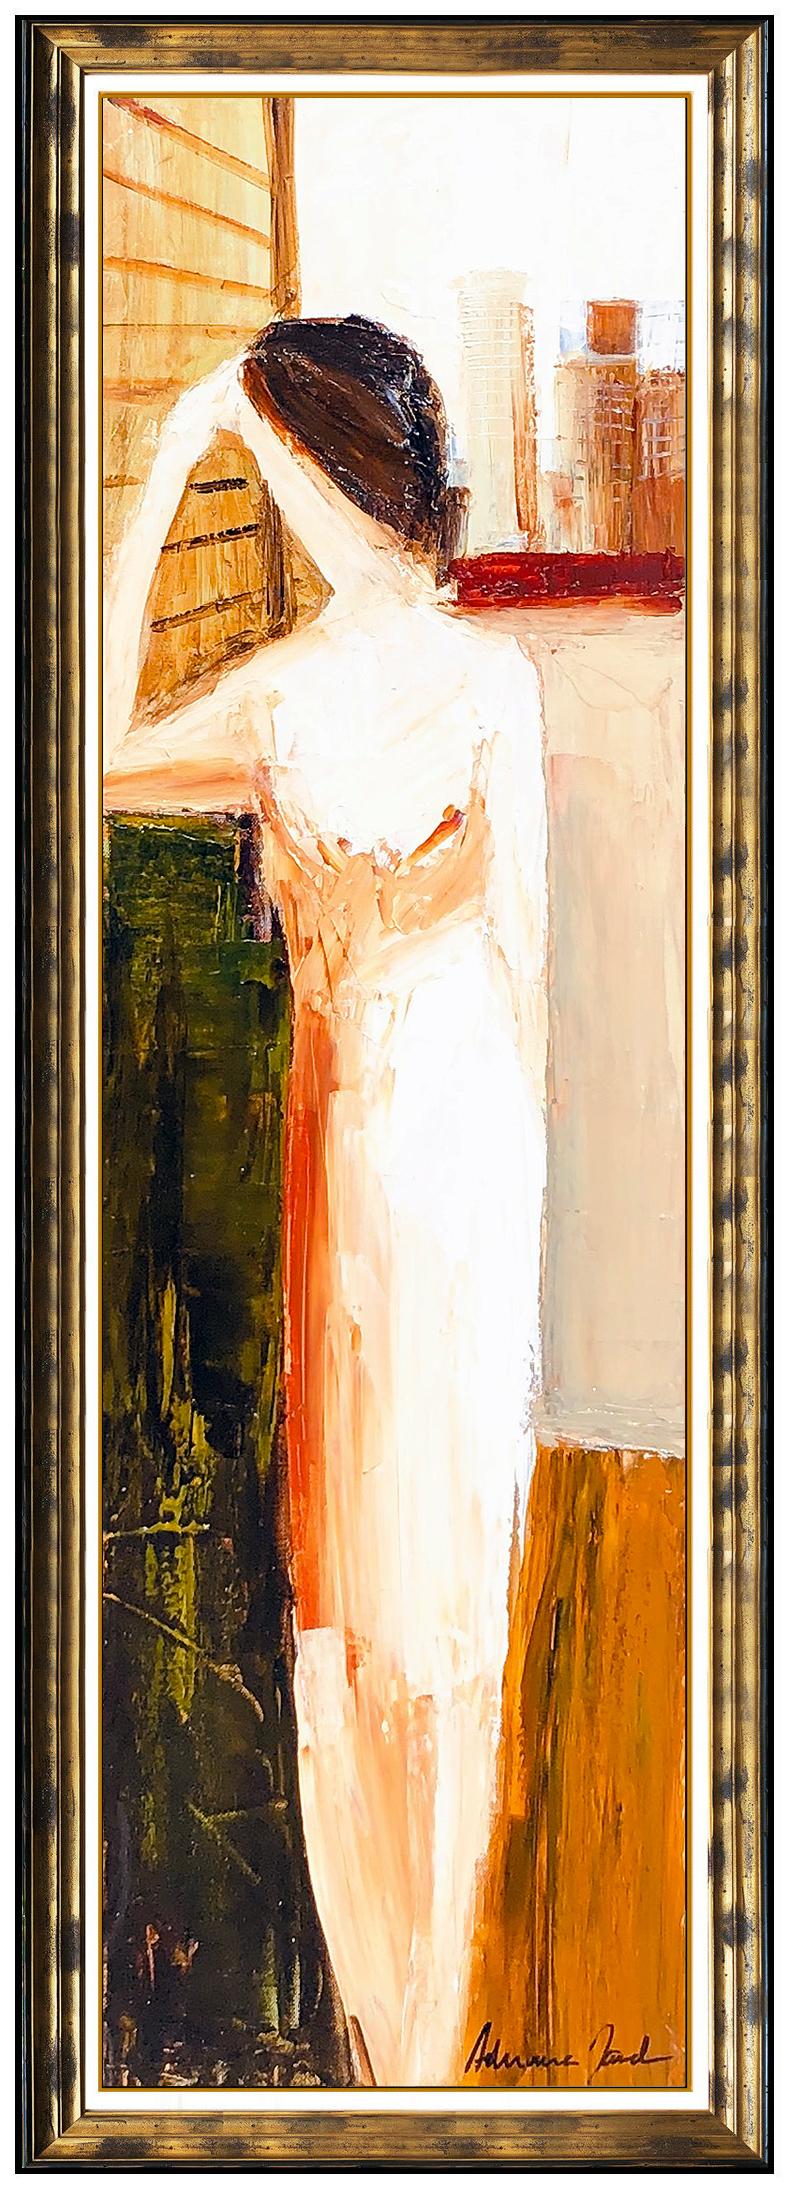 Adriana Naveh Authentic & Large Original Acrylic Painting on Canvas, Professionally Custom Framed and listed with the Submit Best Offer option

Accepting Offers Now: The item up for sale is a spectacular Acrylic Painting on Canvas by Renowned